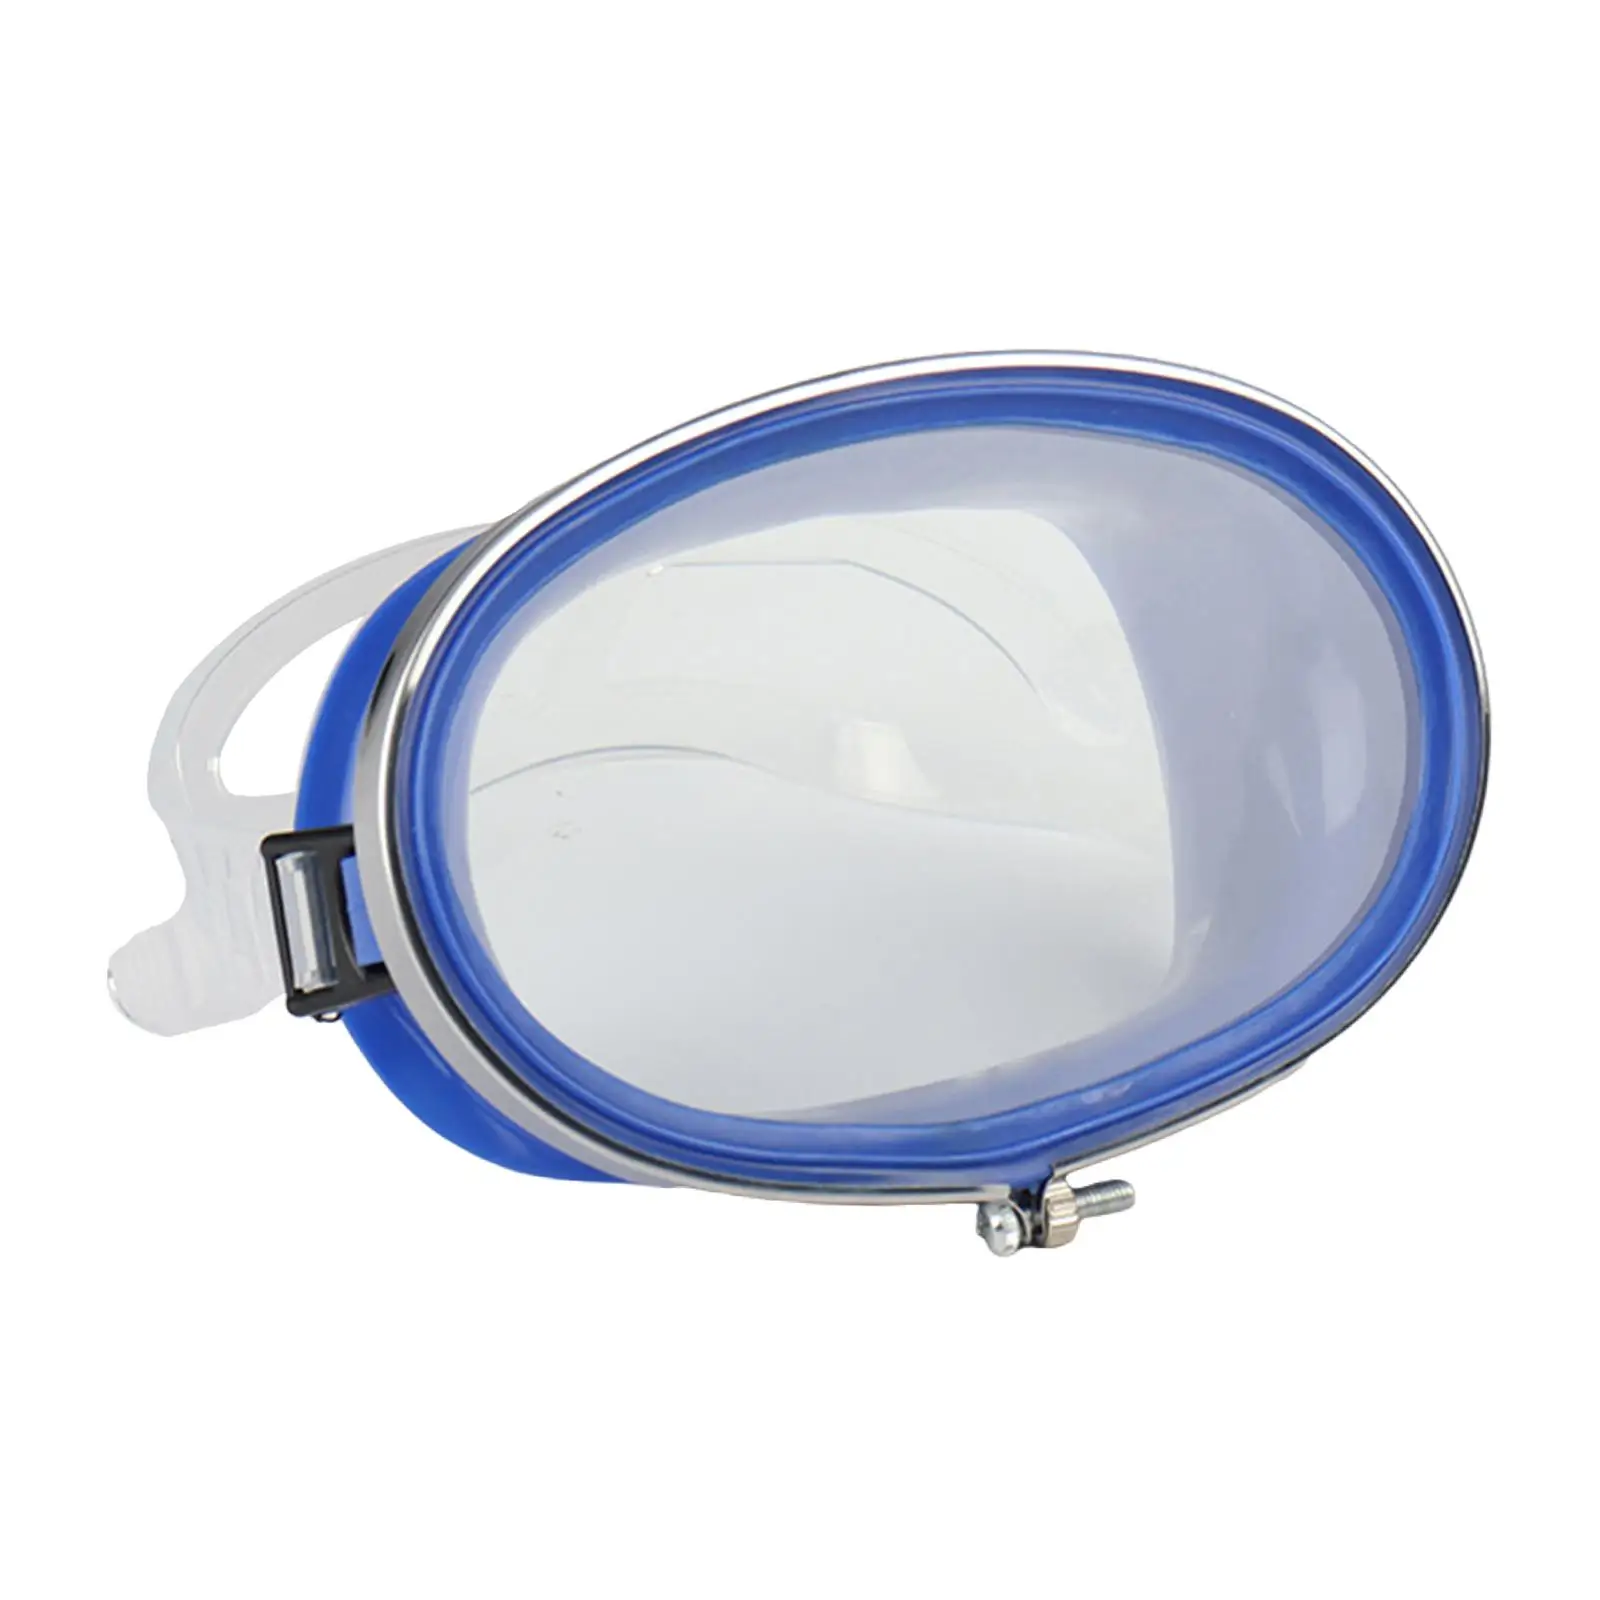 Diving Mask Swimming Goggles Comfort Waterproof Oval Shape Diving Goggles